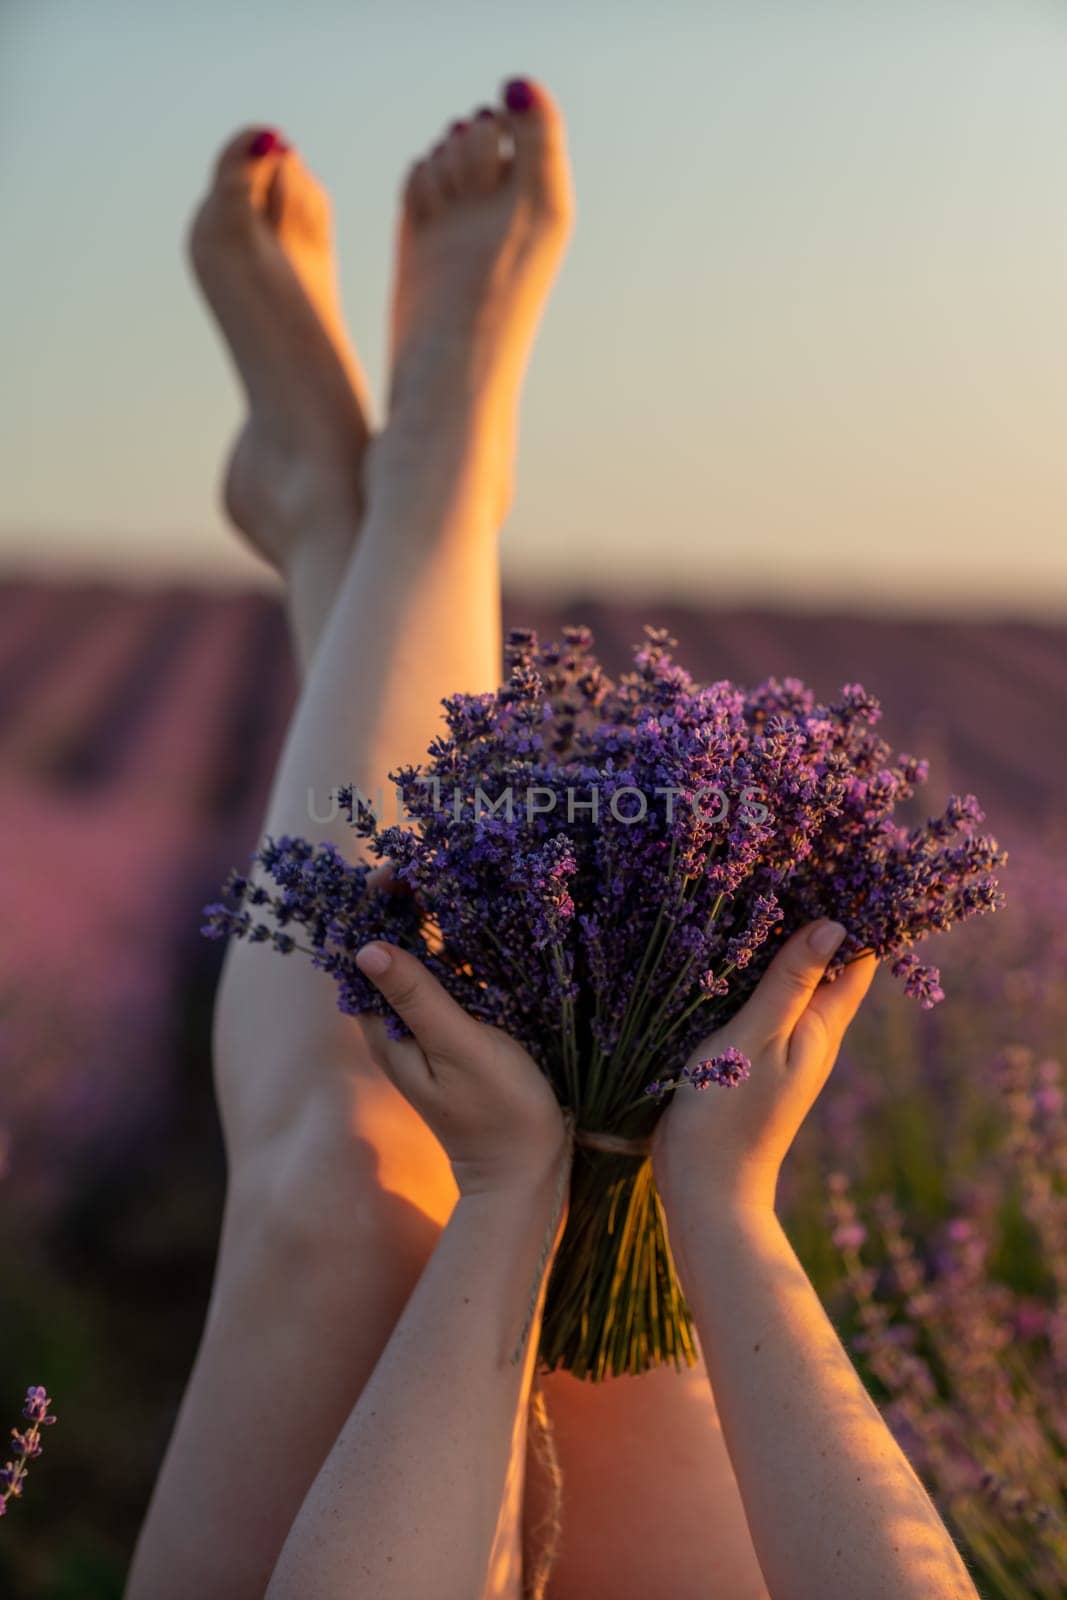 Lavender field woman's legs emerging from the bushes, holding a bouquet of fragrant lavender. Purple lavender bushes in bloom, aromatherapy. by Matiunina